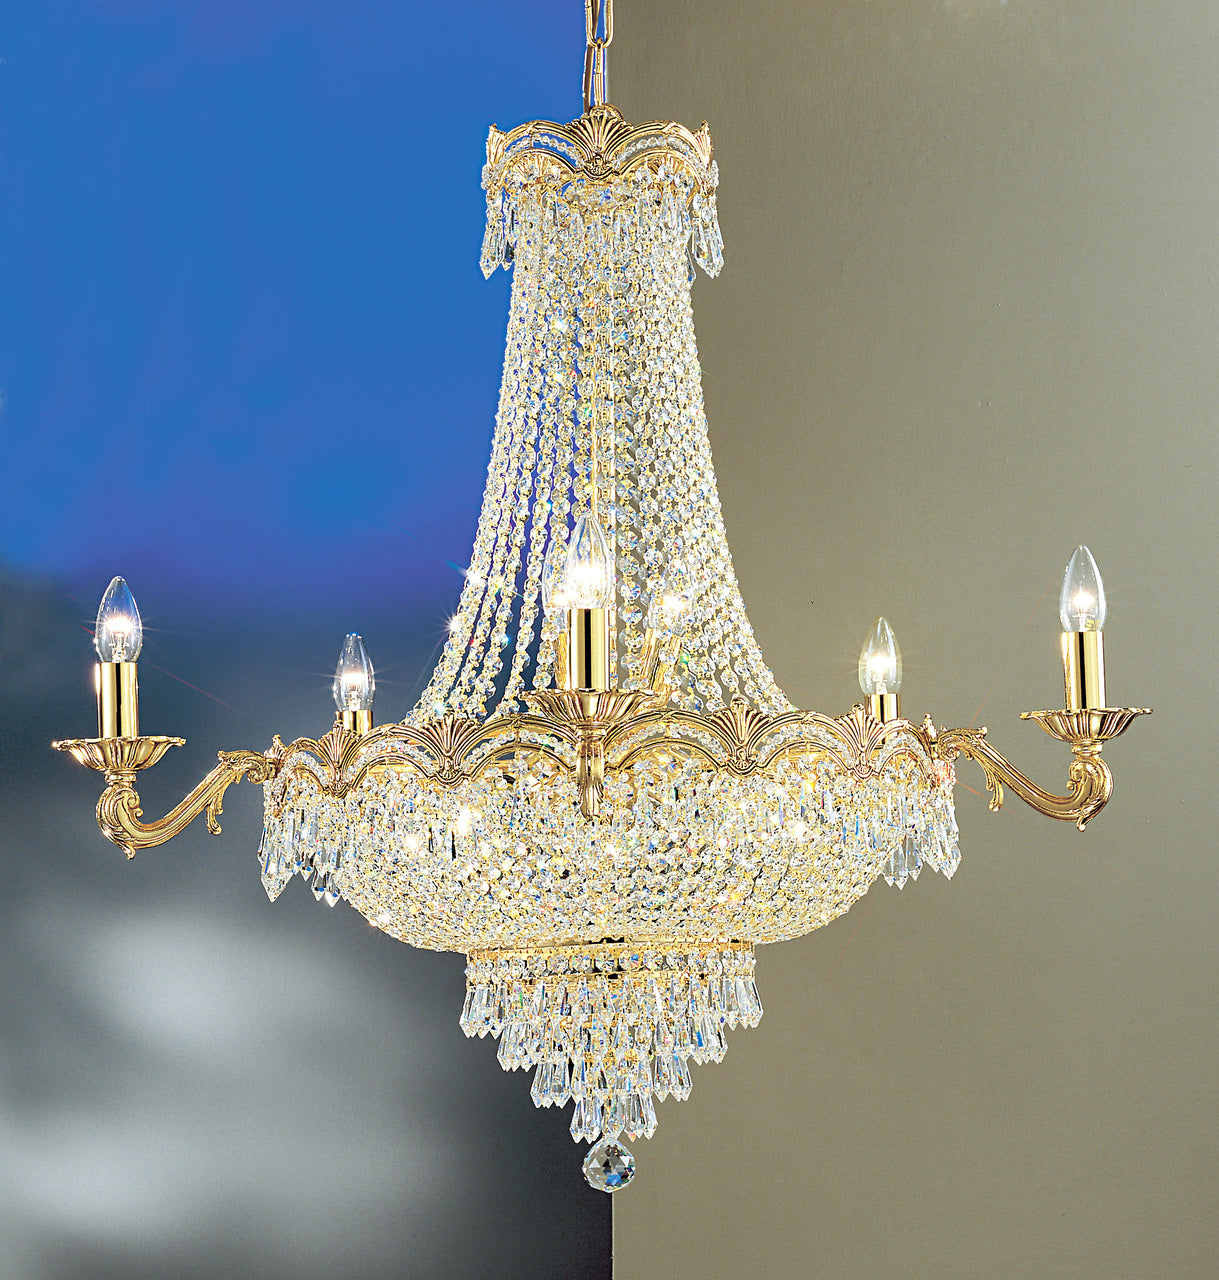 Classic Lighting 1859 G SGT Regency II Crystal Chandelier in 24k Gold (Imported from Spain)